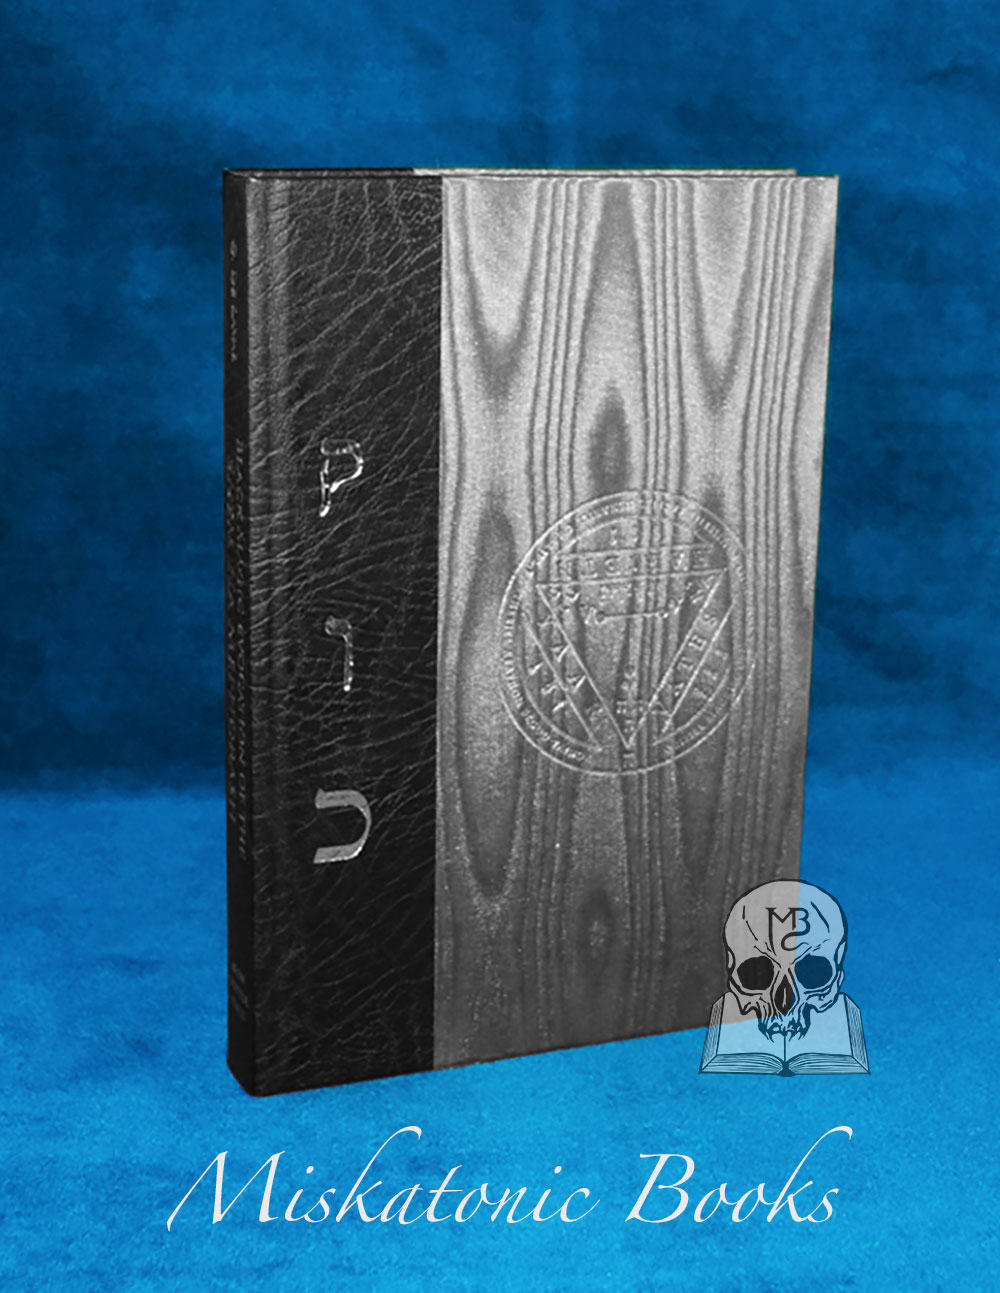 BLACK MAGIC EVOCATION OF THE SHEM HA MEPHORASH by G. de Laval (Quarter Bound In Leather Limited Edition)